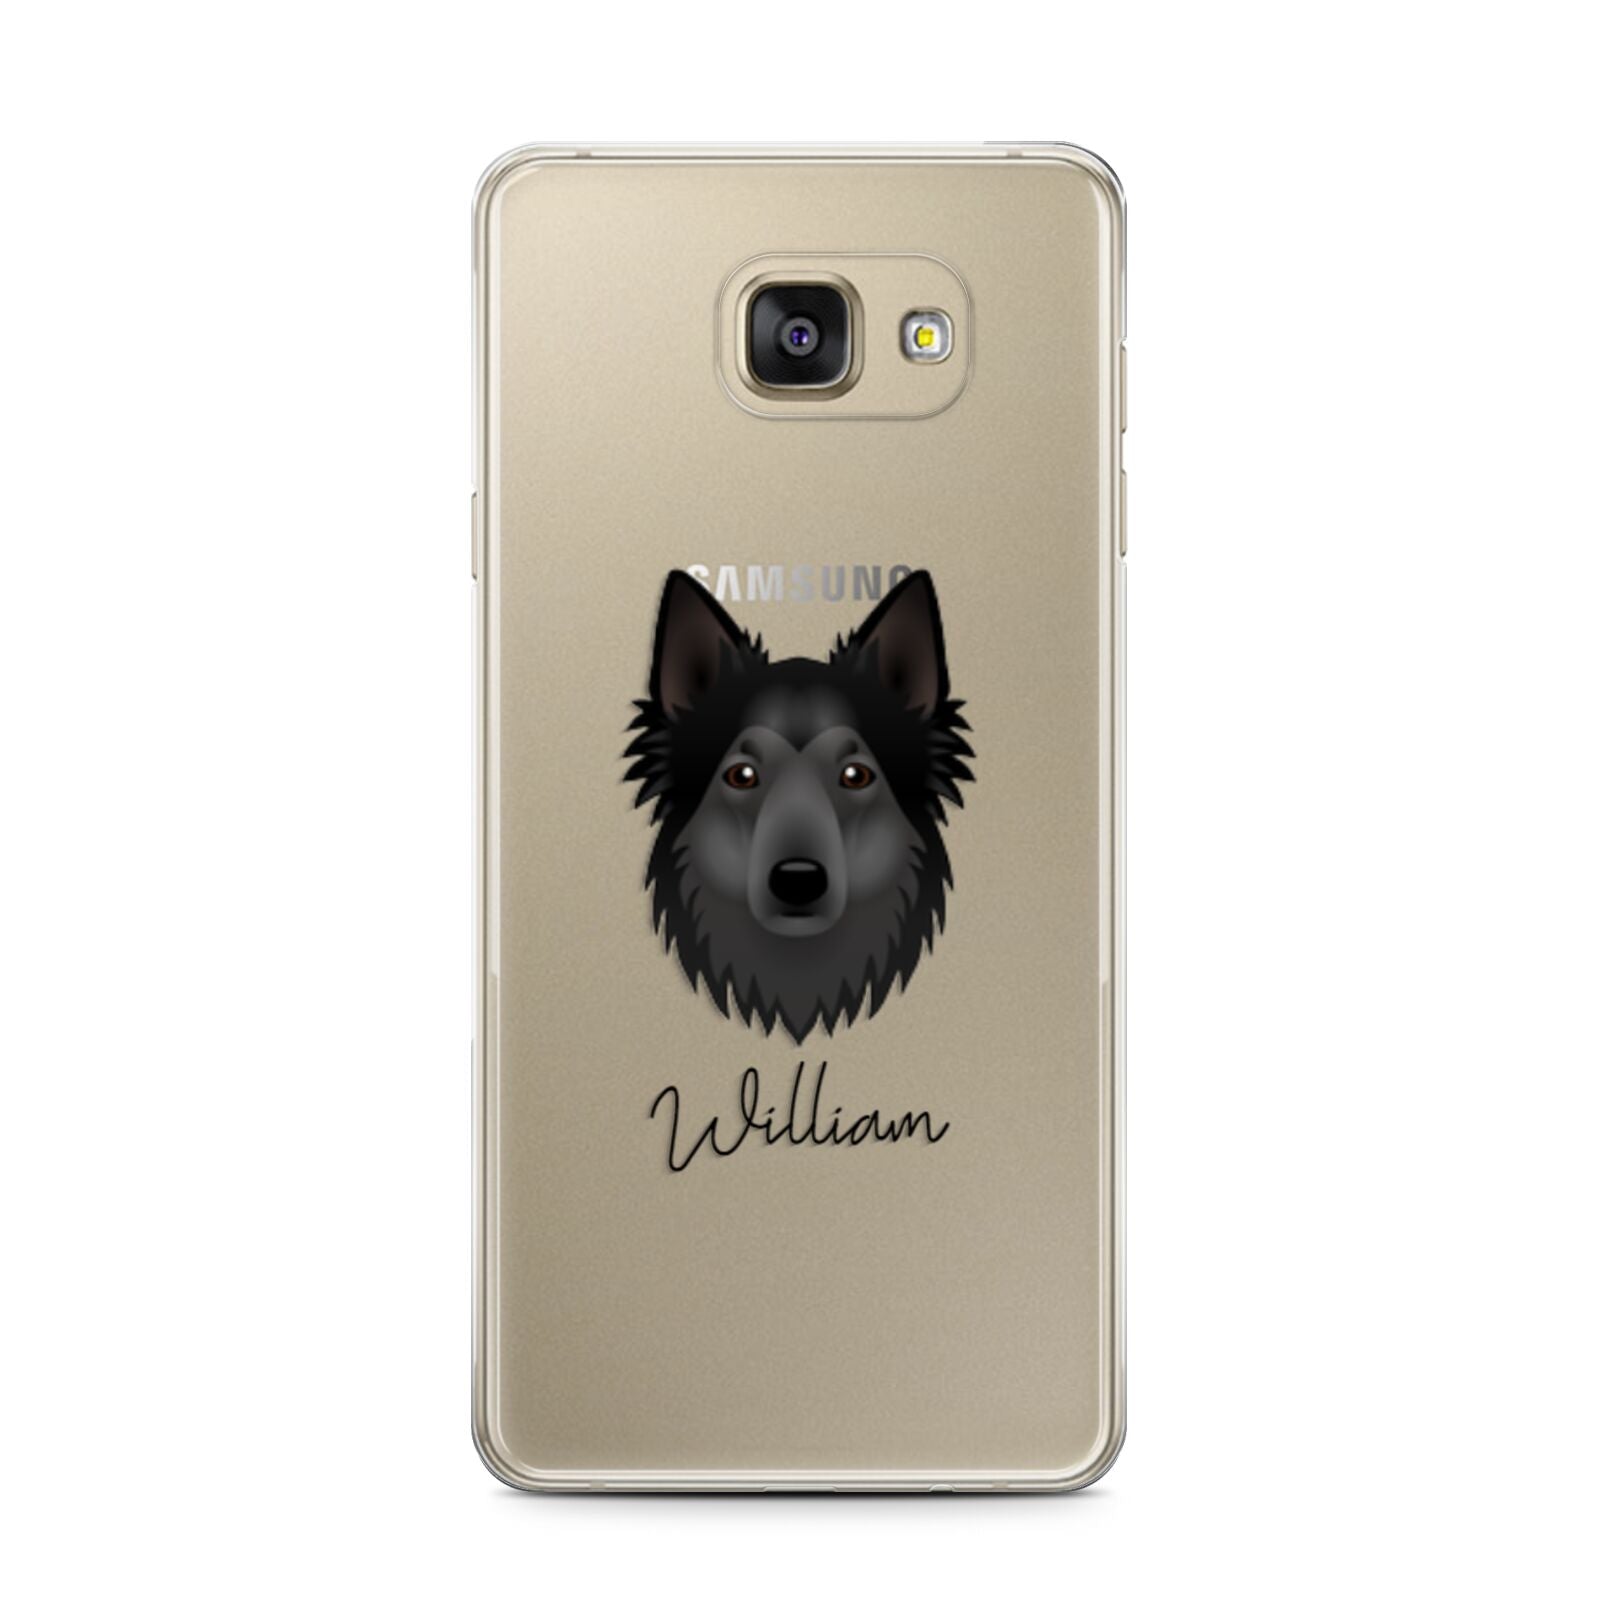 Shollie Personalised Samsung Galaxy A7 2016 Case on gold phone